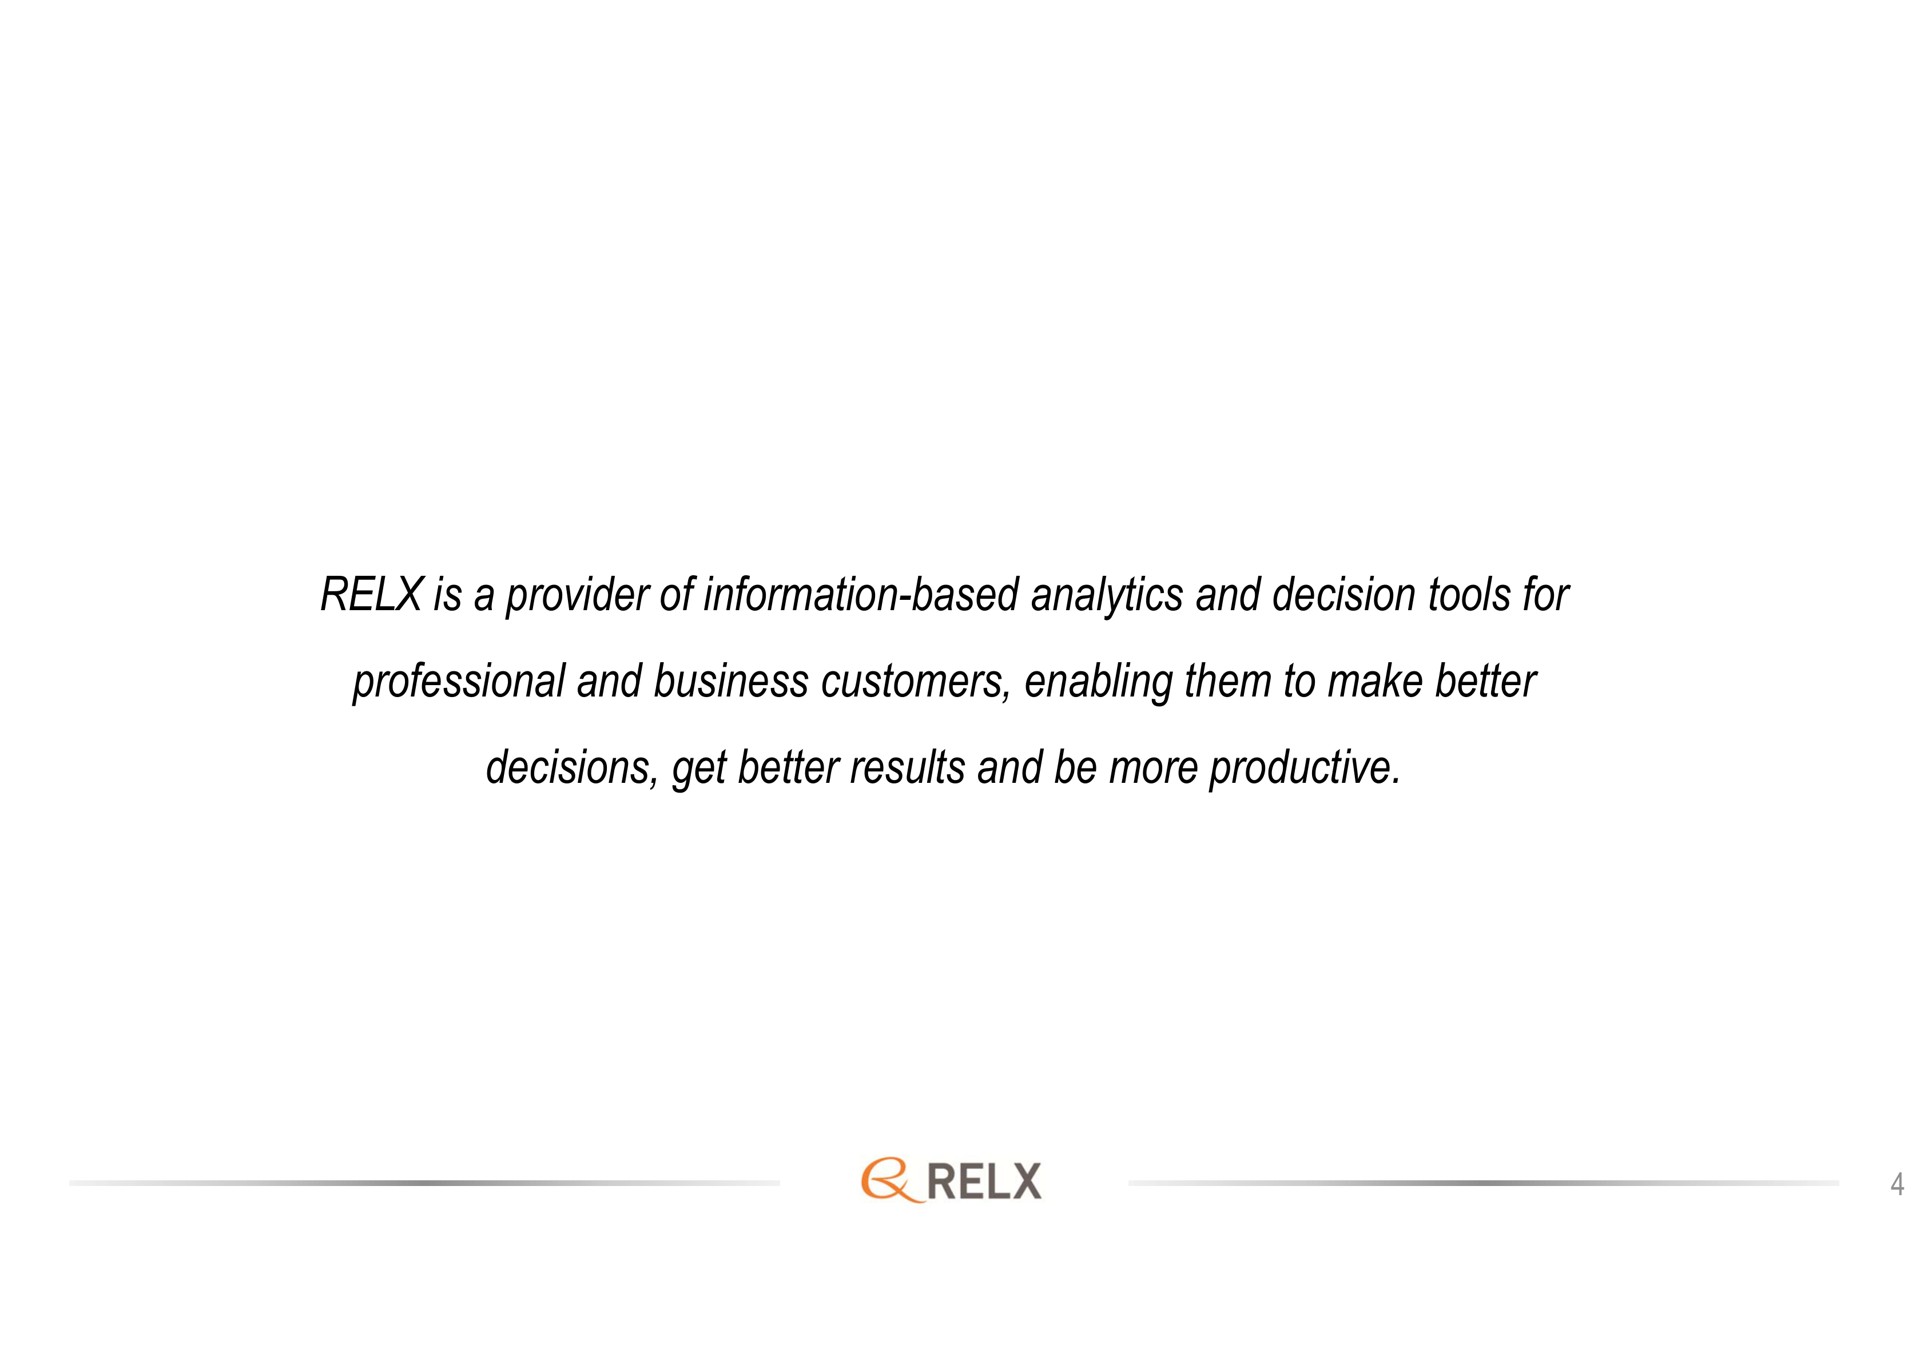 is a provider of information based analytics and decision tools for professional and business customers enabling them to make better decisions get better results and be more productive | RELX